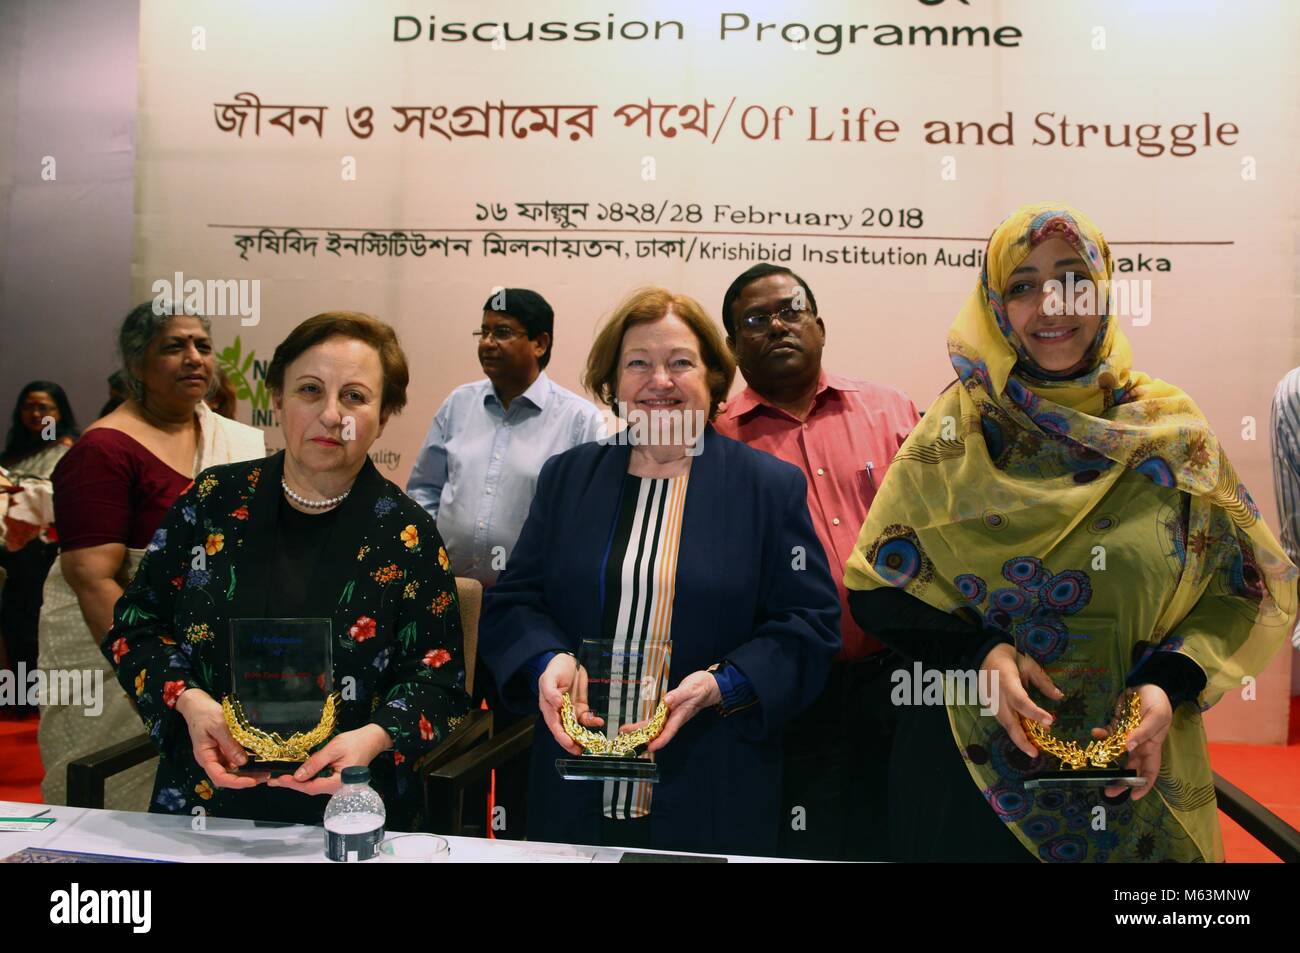 Dhaka, Bangladesh. 28th Feb, 2018. February 28, 2018 Dhaka, Bangladesh The three female Nobel Peace laureates received crest form the Naripokkha Women's organization left to right Shirin Ebadi of Iran's, Mairead Maguire of Northern Ireland's and Tawakkol Karman of Yemen's, they discussion on the topic ''˜ Of Life and Struggle speaks at Krishibid Institution Auditorium, Khamar Bari in Dhaka. The conclusion of their visit to Bangladesh on the six-month anniversary of the current Rohingya crisis that forced millions to flee into Bangladesh from Rakhine state of Myanmar.28 February 20 Stock Photo